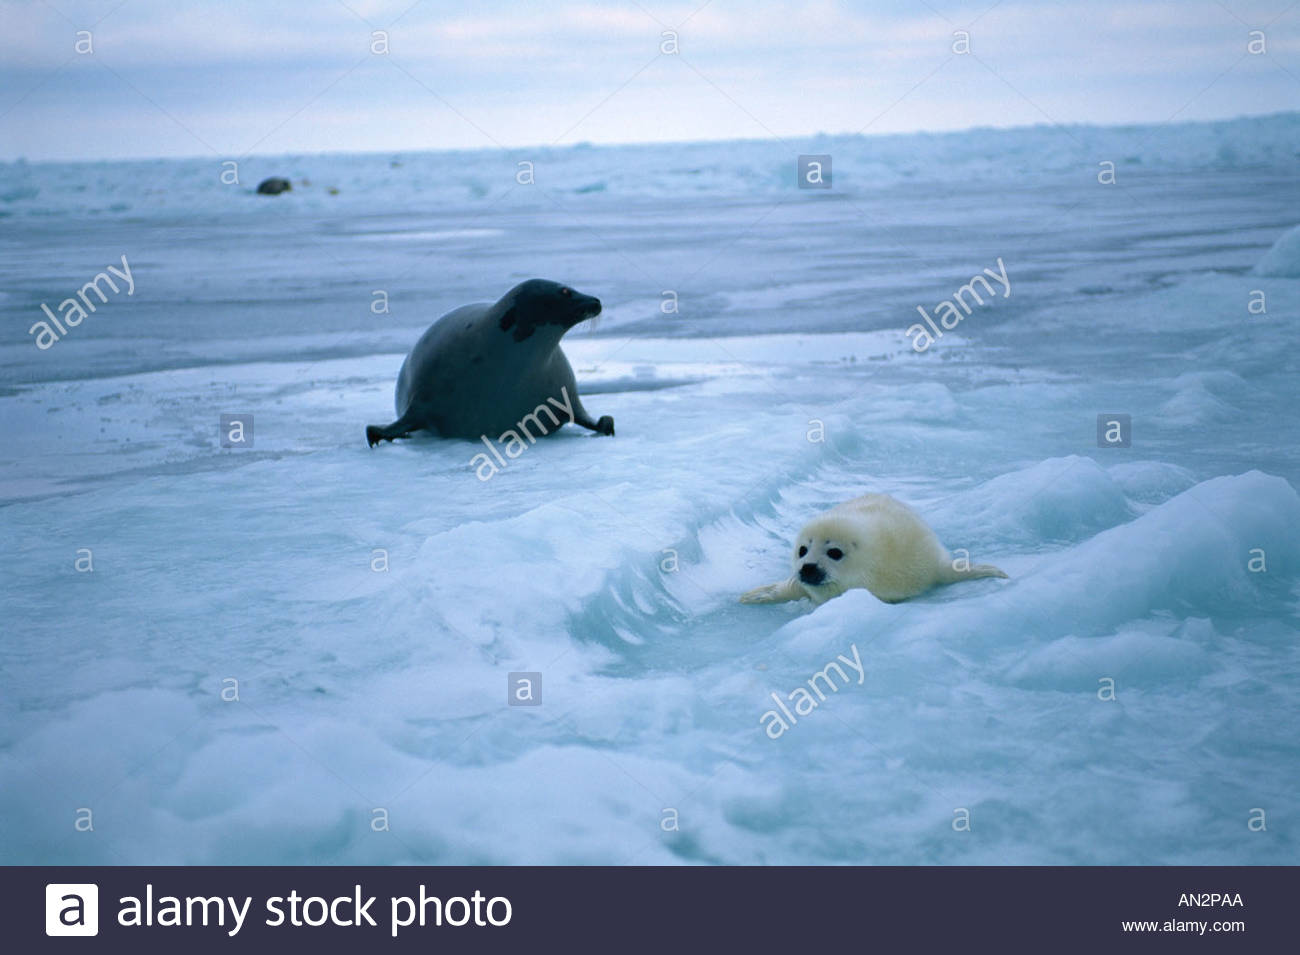 Mother and baby seal lying on ice - Stock Image